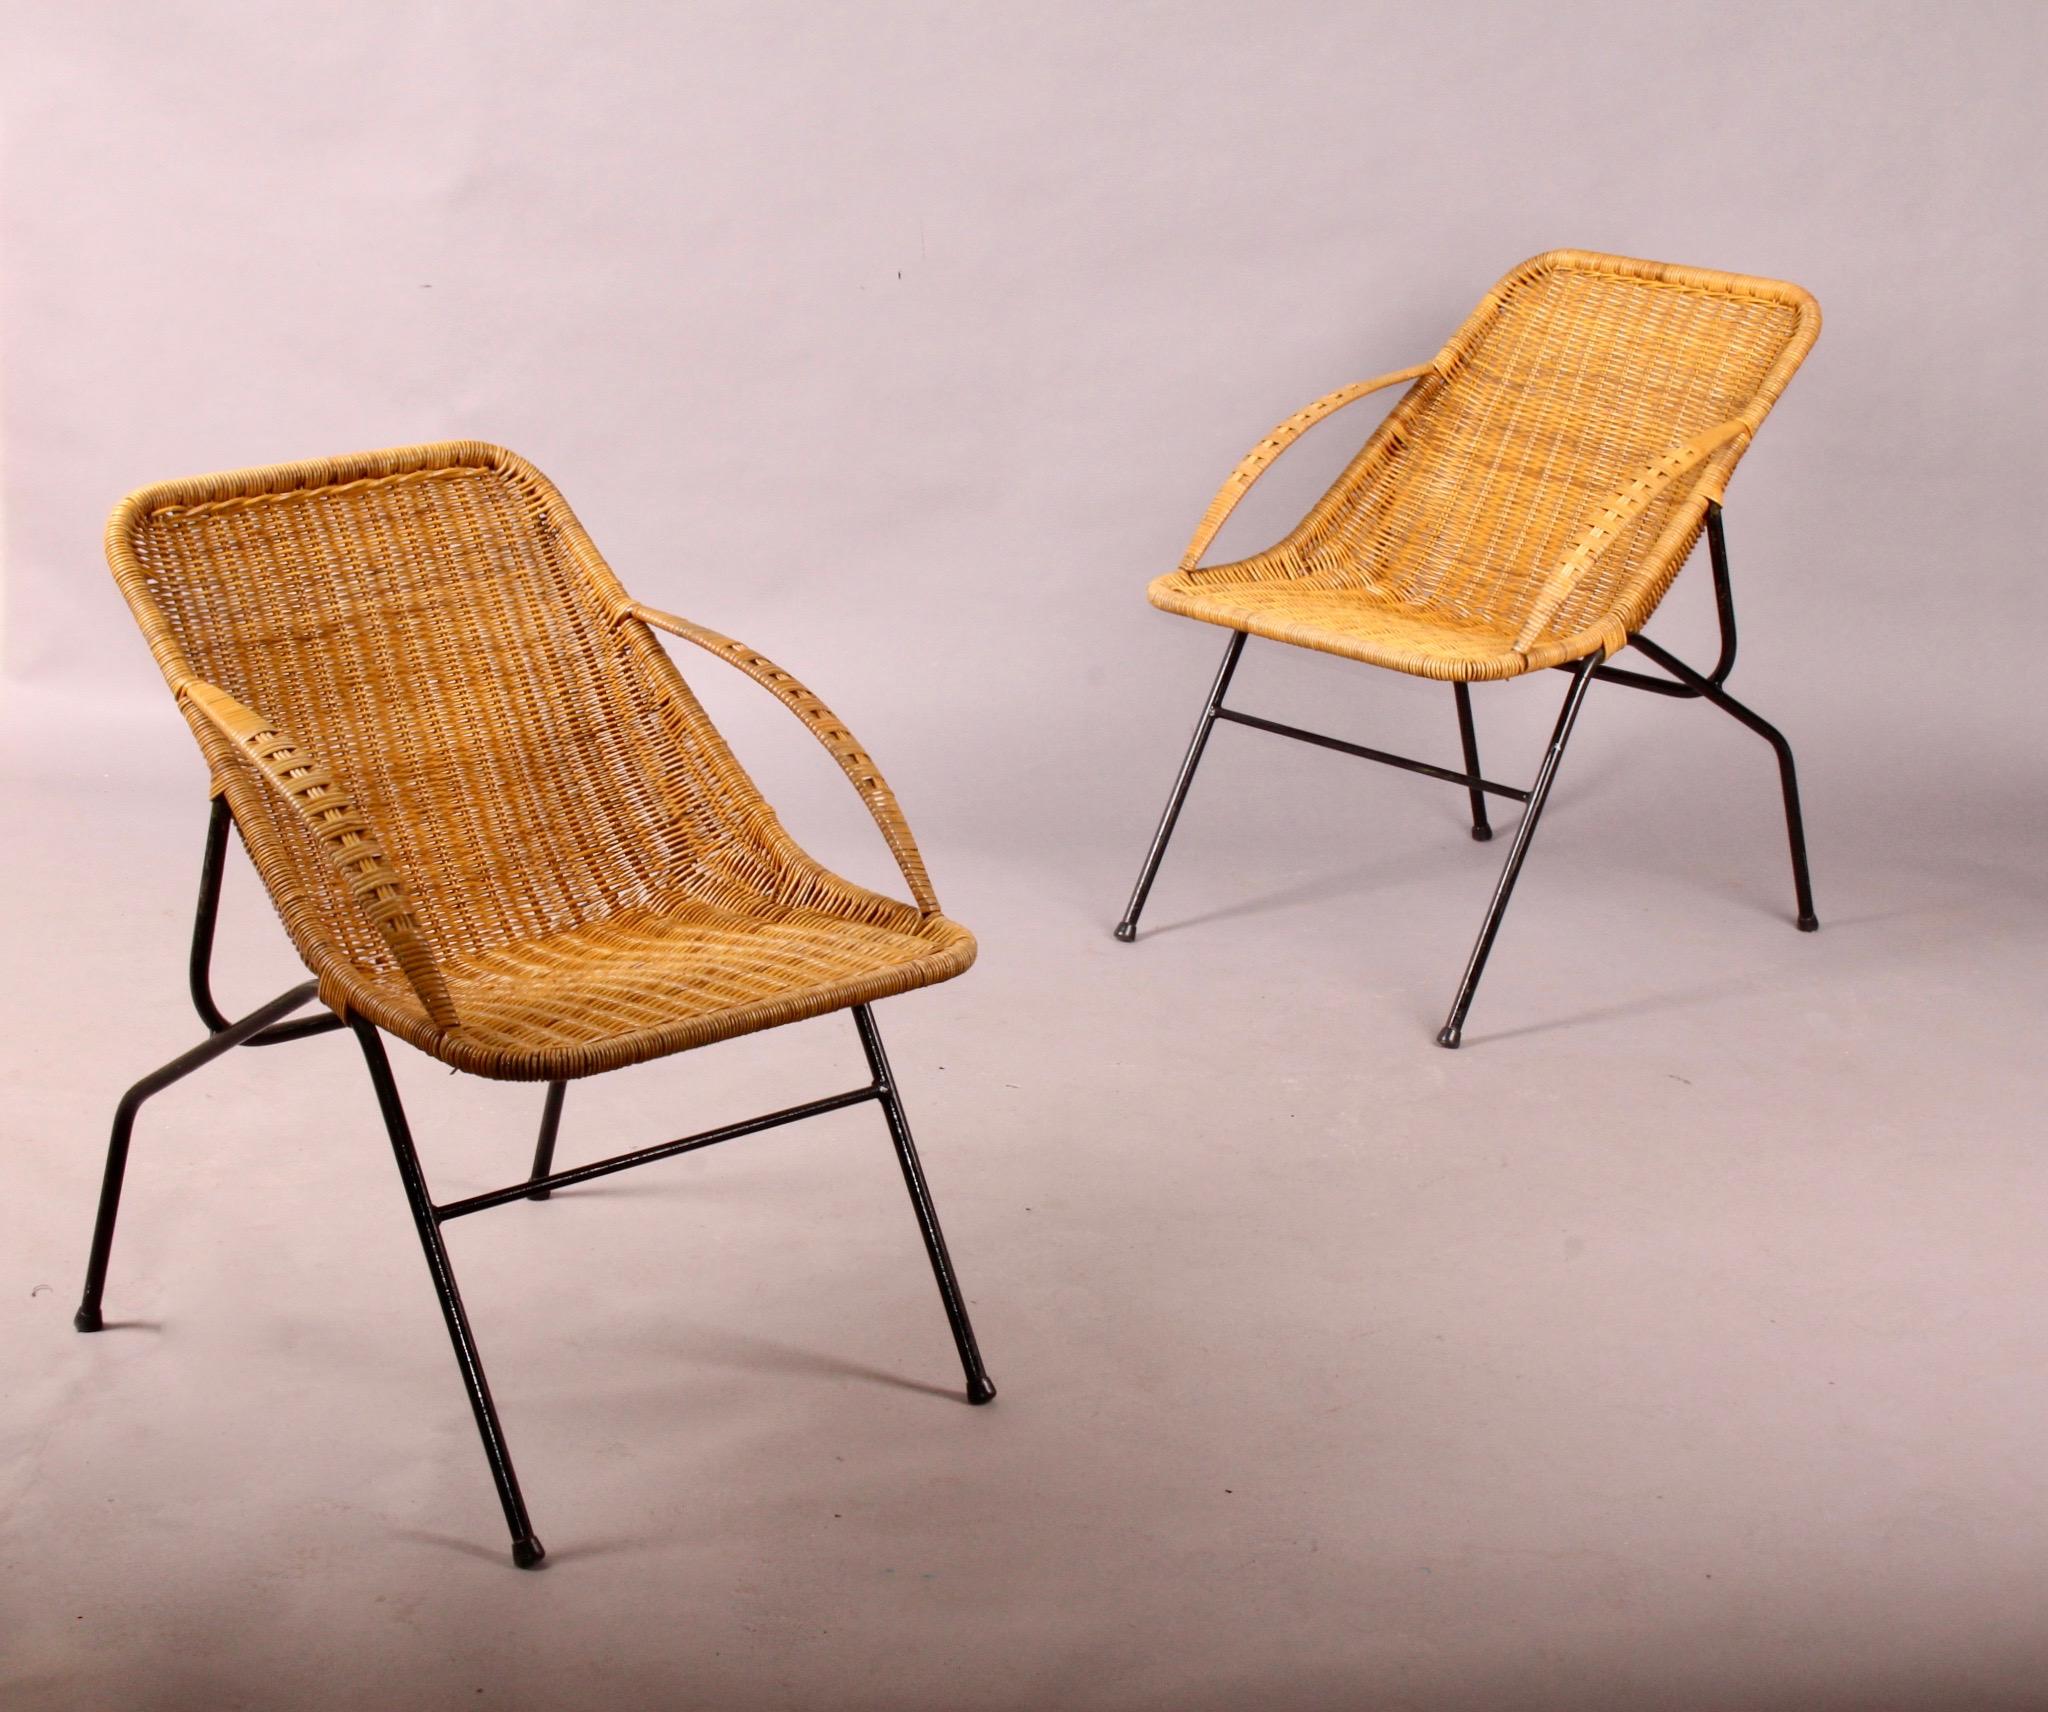 French pair of woven cane chairs, 1950s.